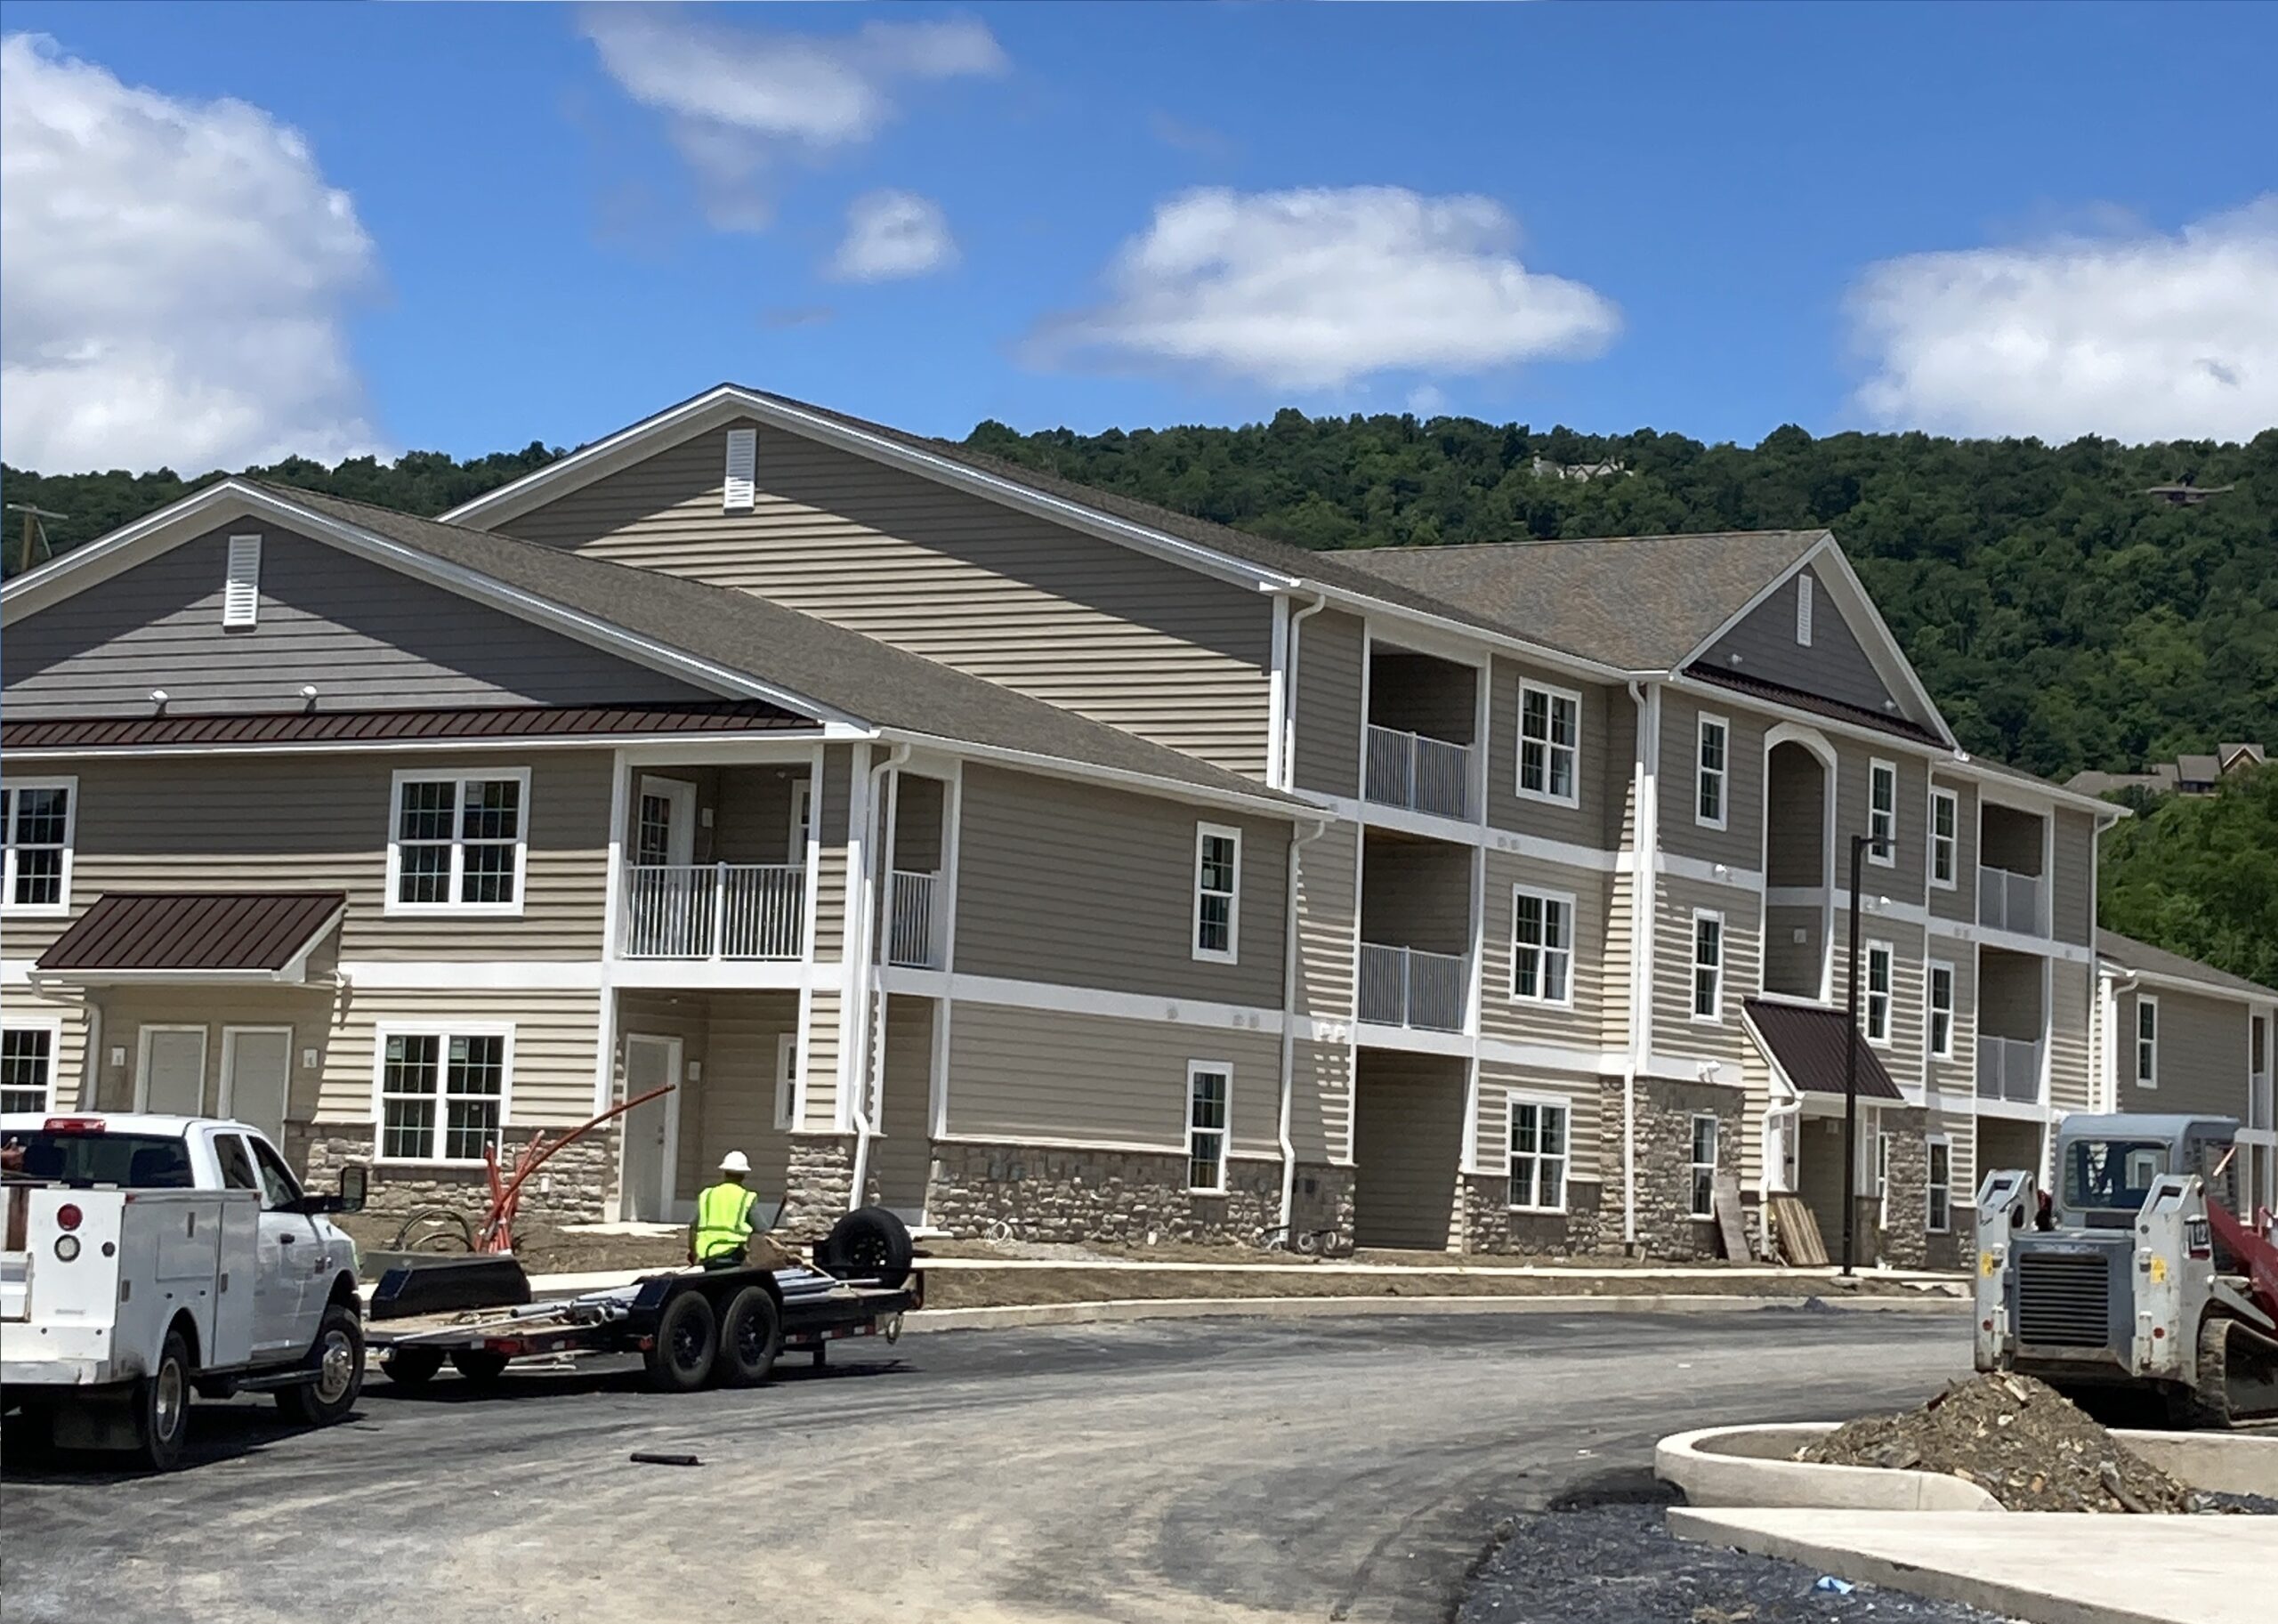 Harrisburg Apartments for rent. Construction of The Reserve at River's Edge in Harrisburg Pa.